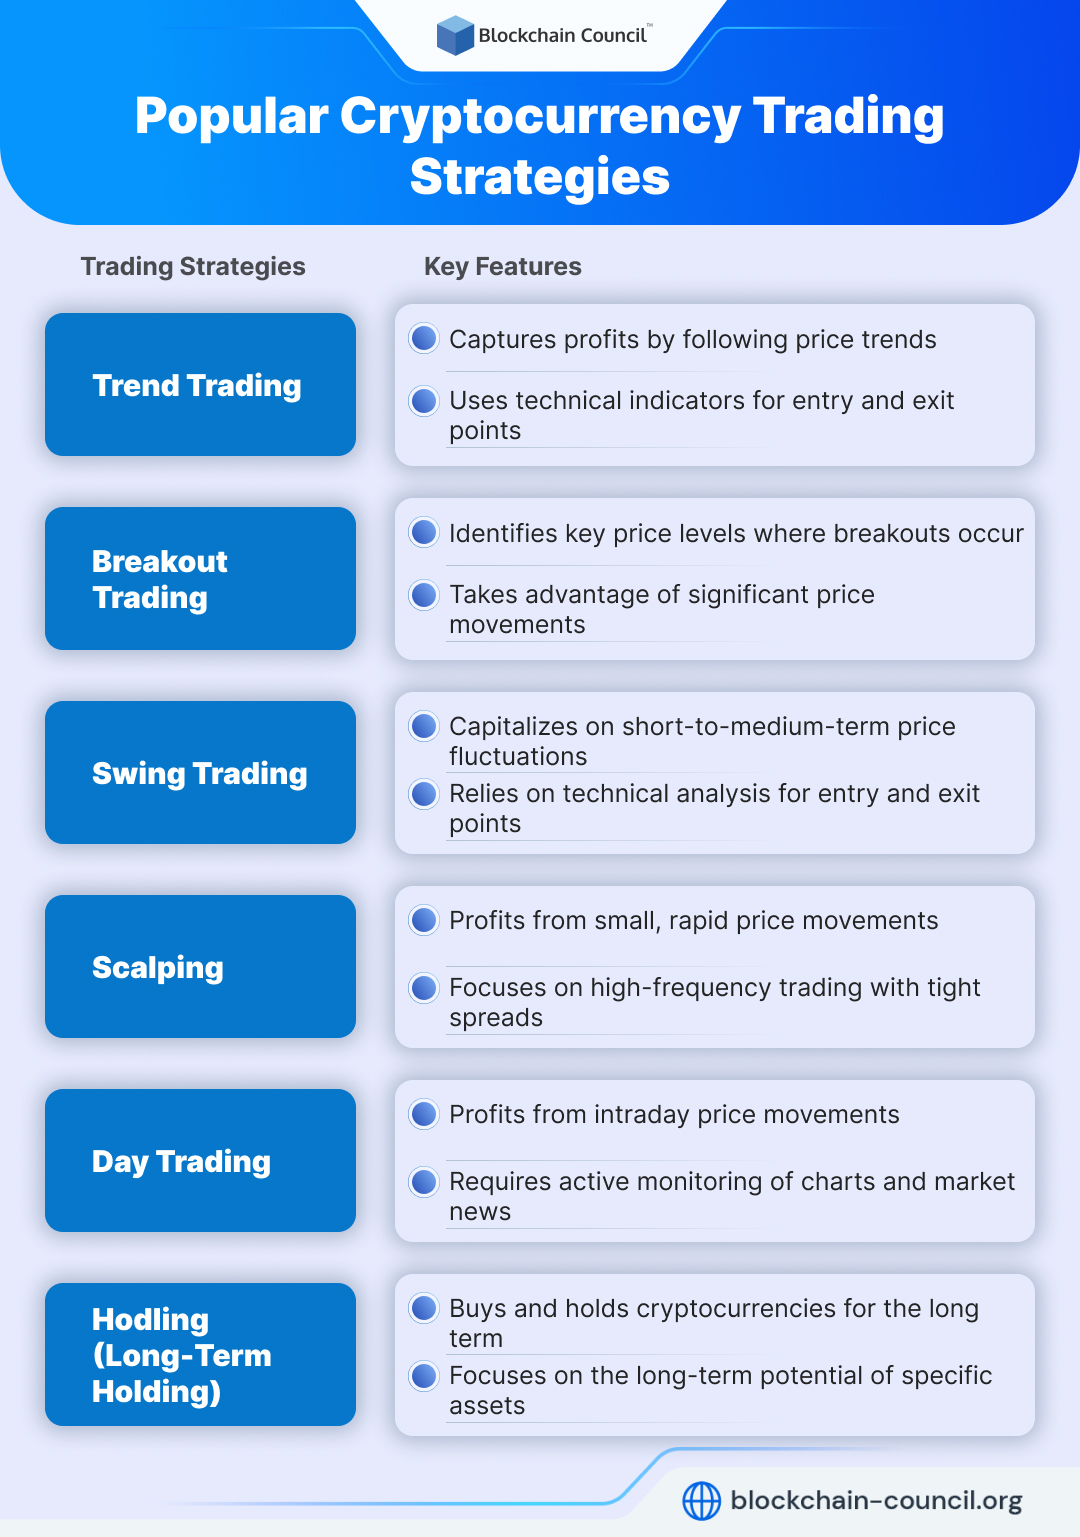 Popular Cryptocurrency Trading Strategies
